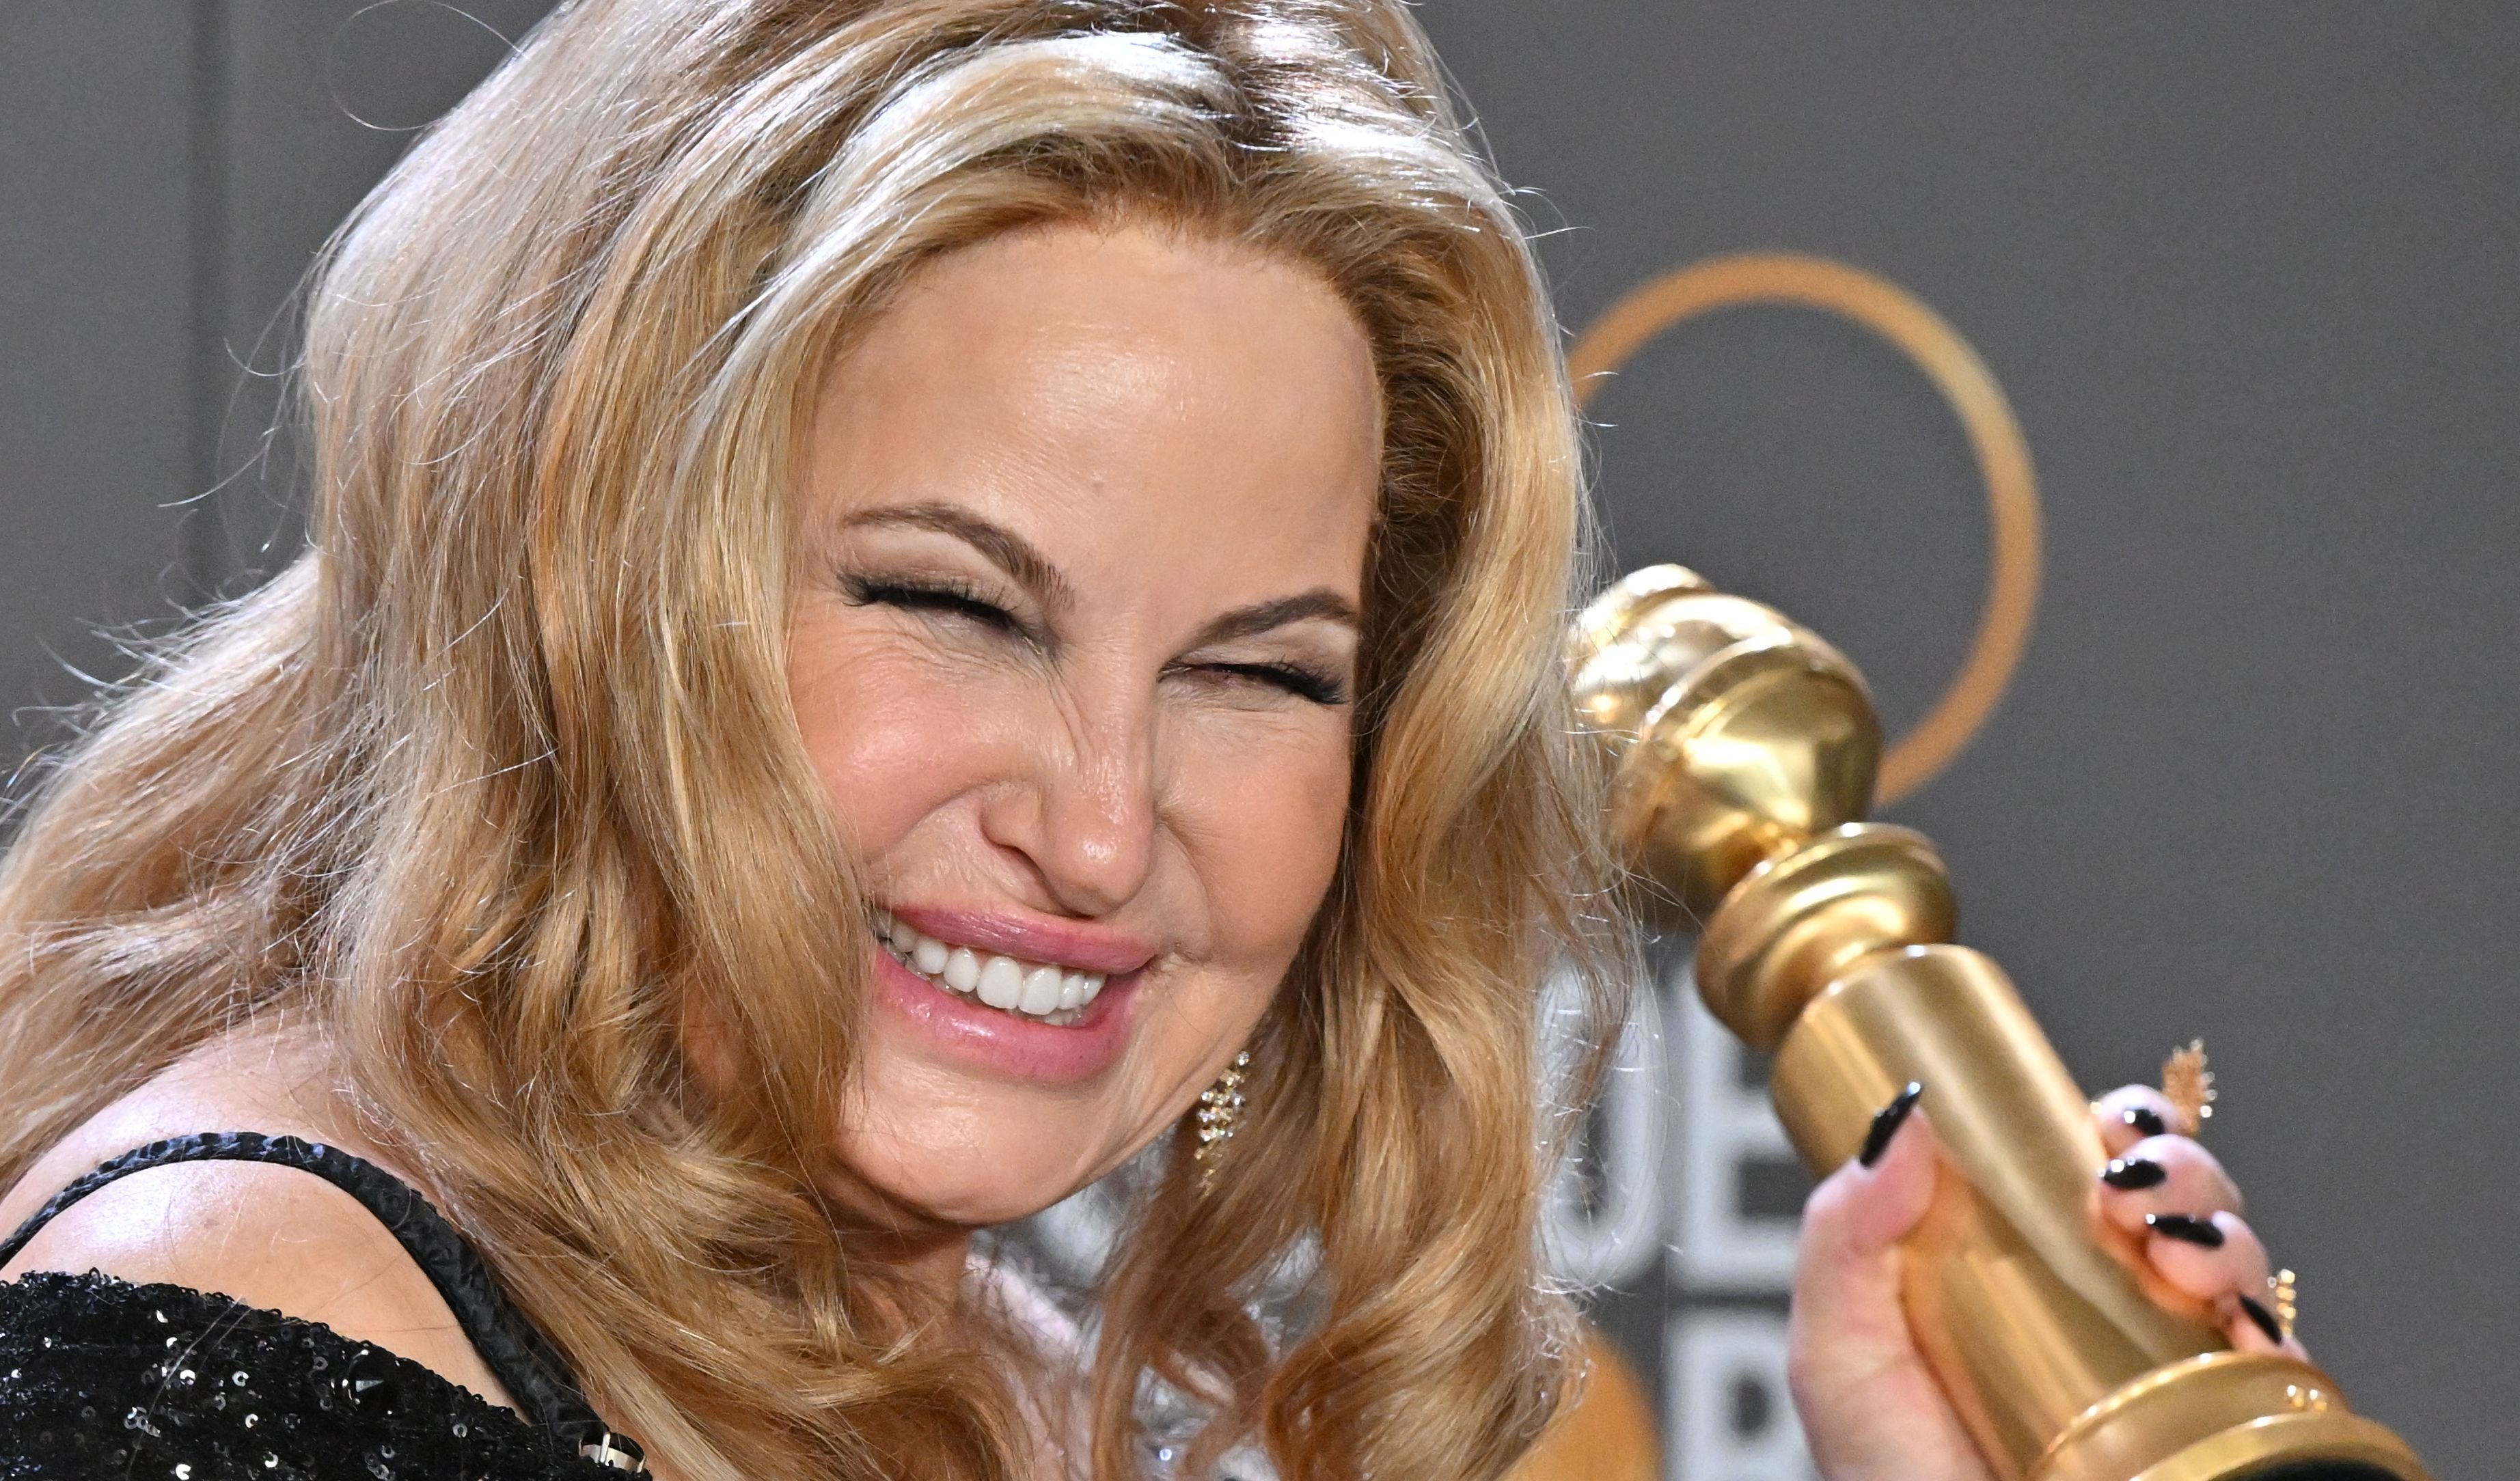 Jennifer Coolidge poses with her award for Best Supporting Actress - Television Limited Series/Motion Picture for "The White Lotus" in the press room during the 80th annual Golden Globe Awards at The Beverly Hilton Hotel in Beverly Hills, California, on January 10, 2023. | Source: Getty Images